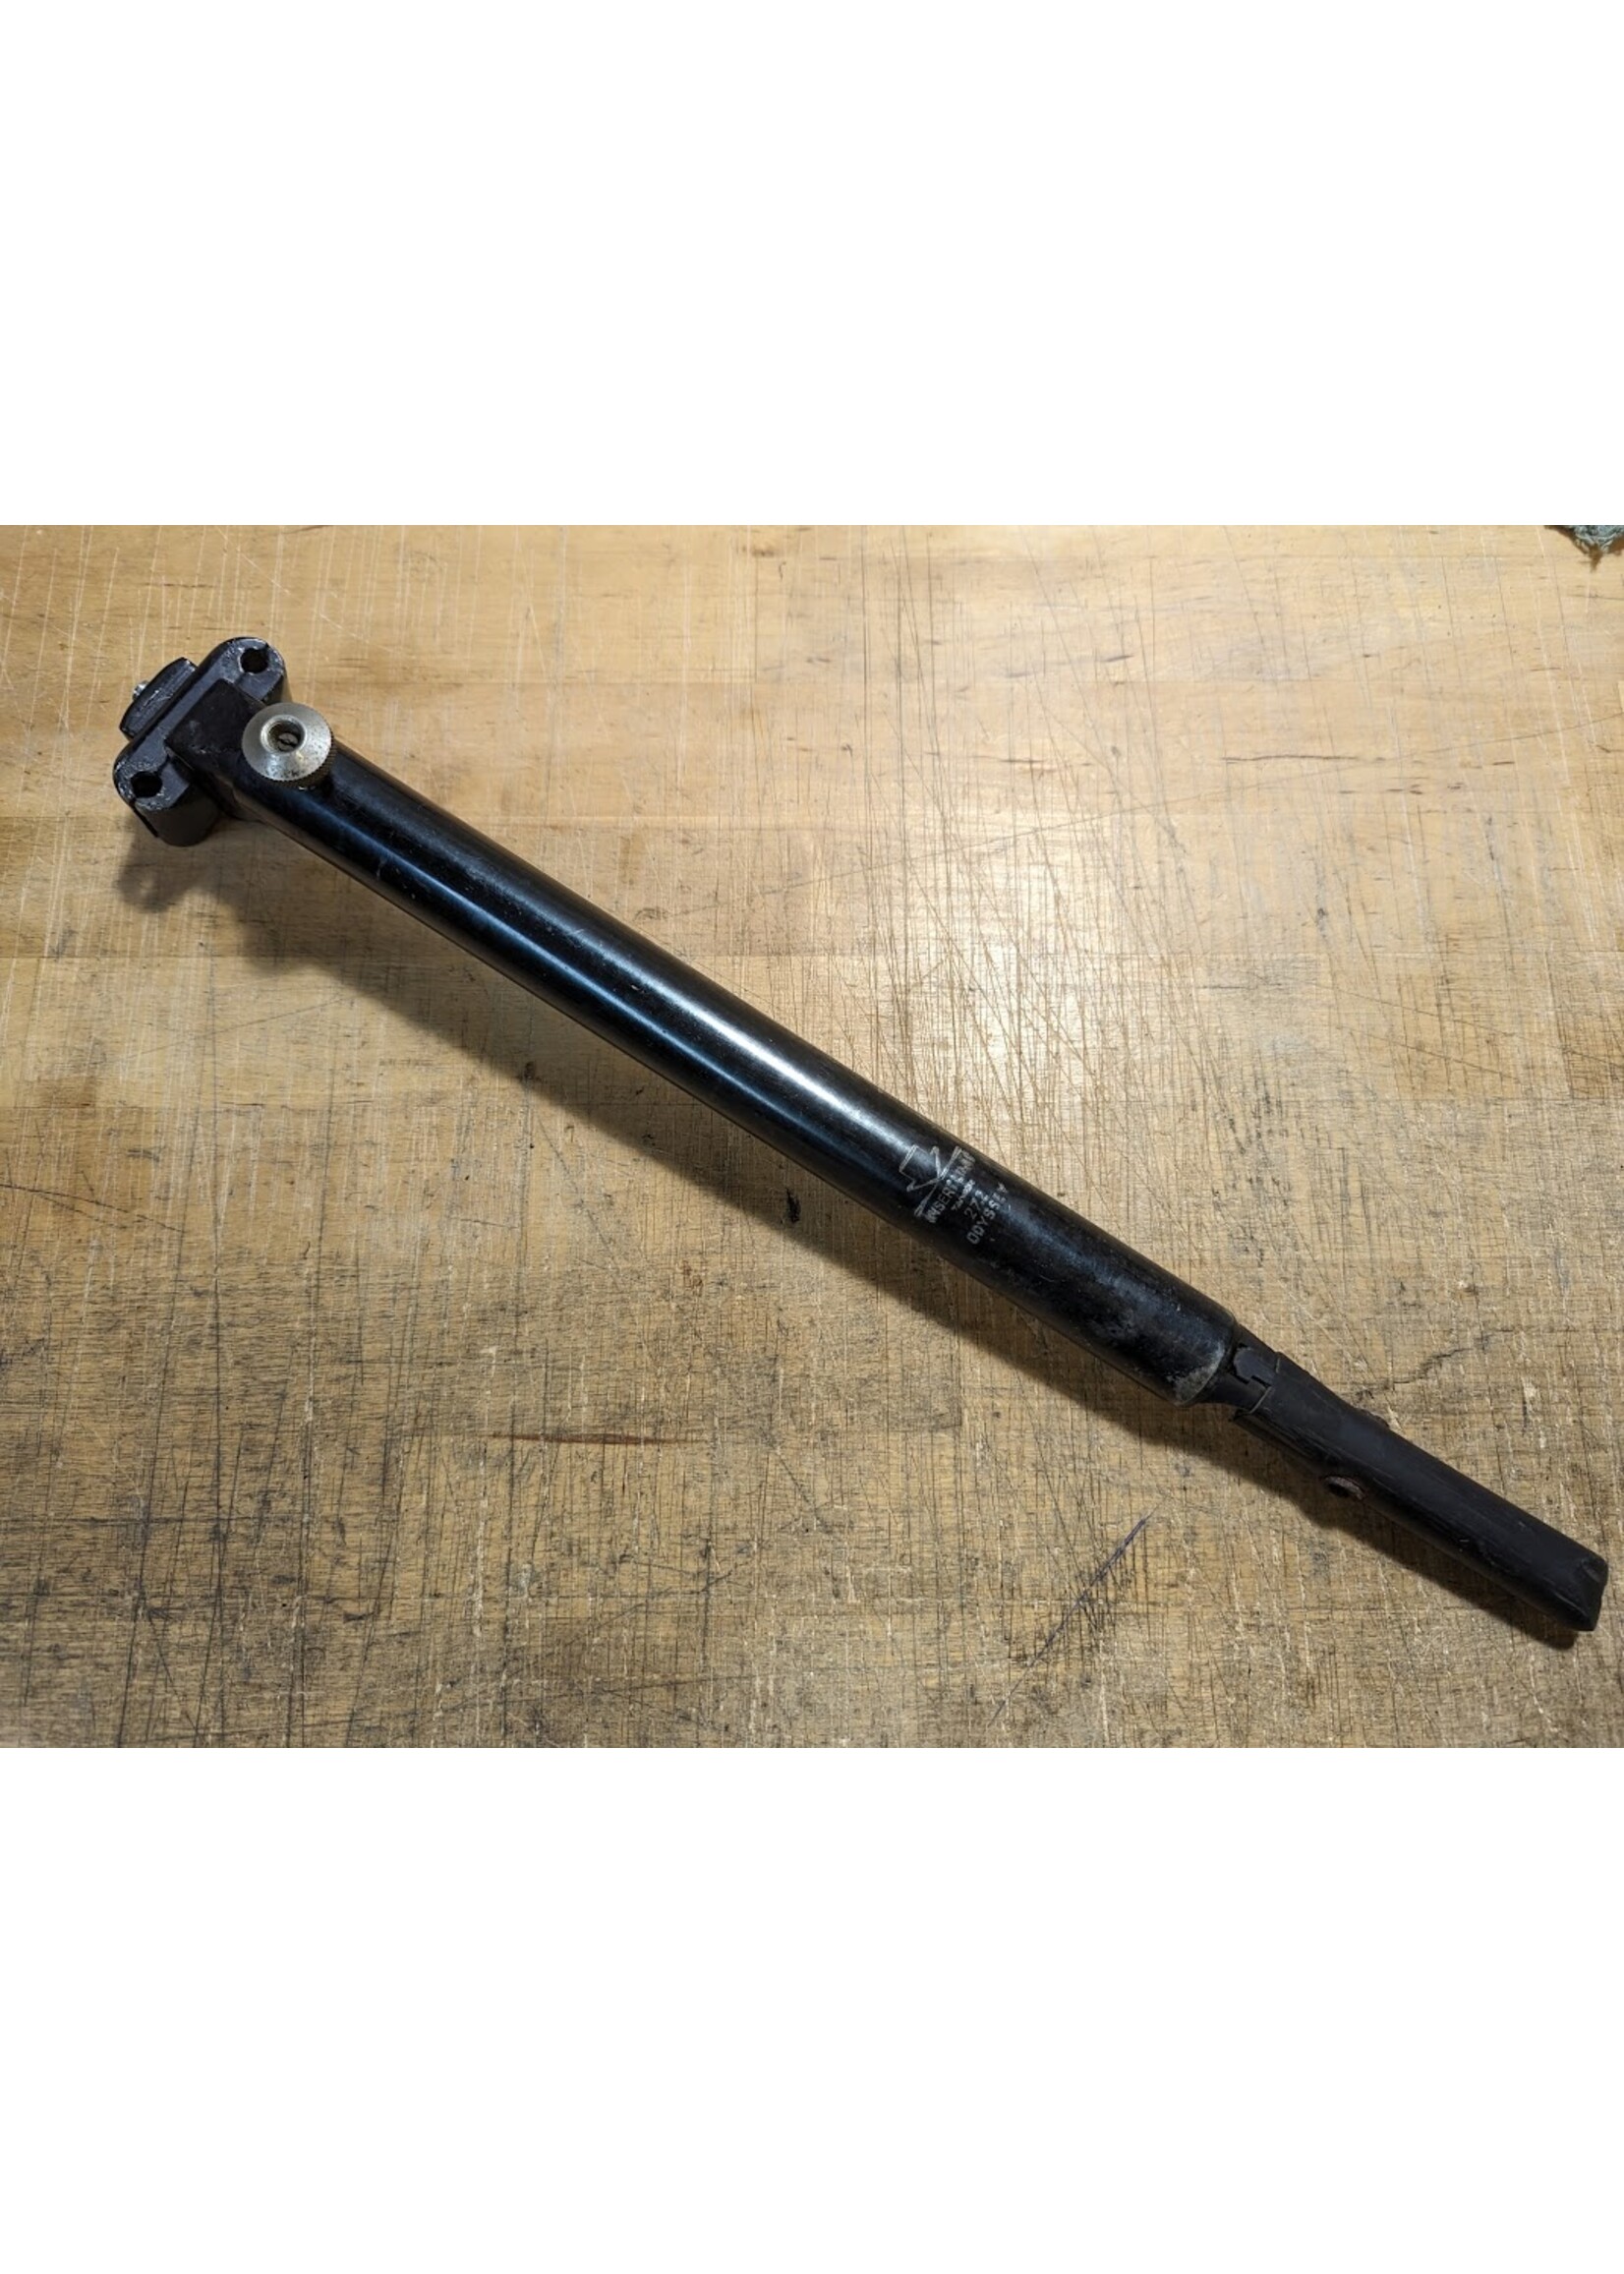 ODYSSEY Aerator 27.2mm Seatpost with built in pump!